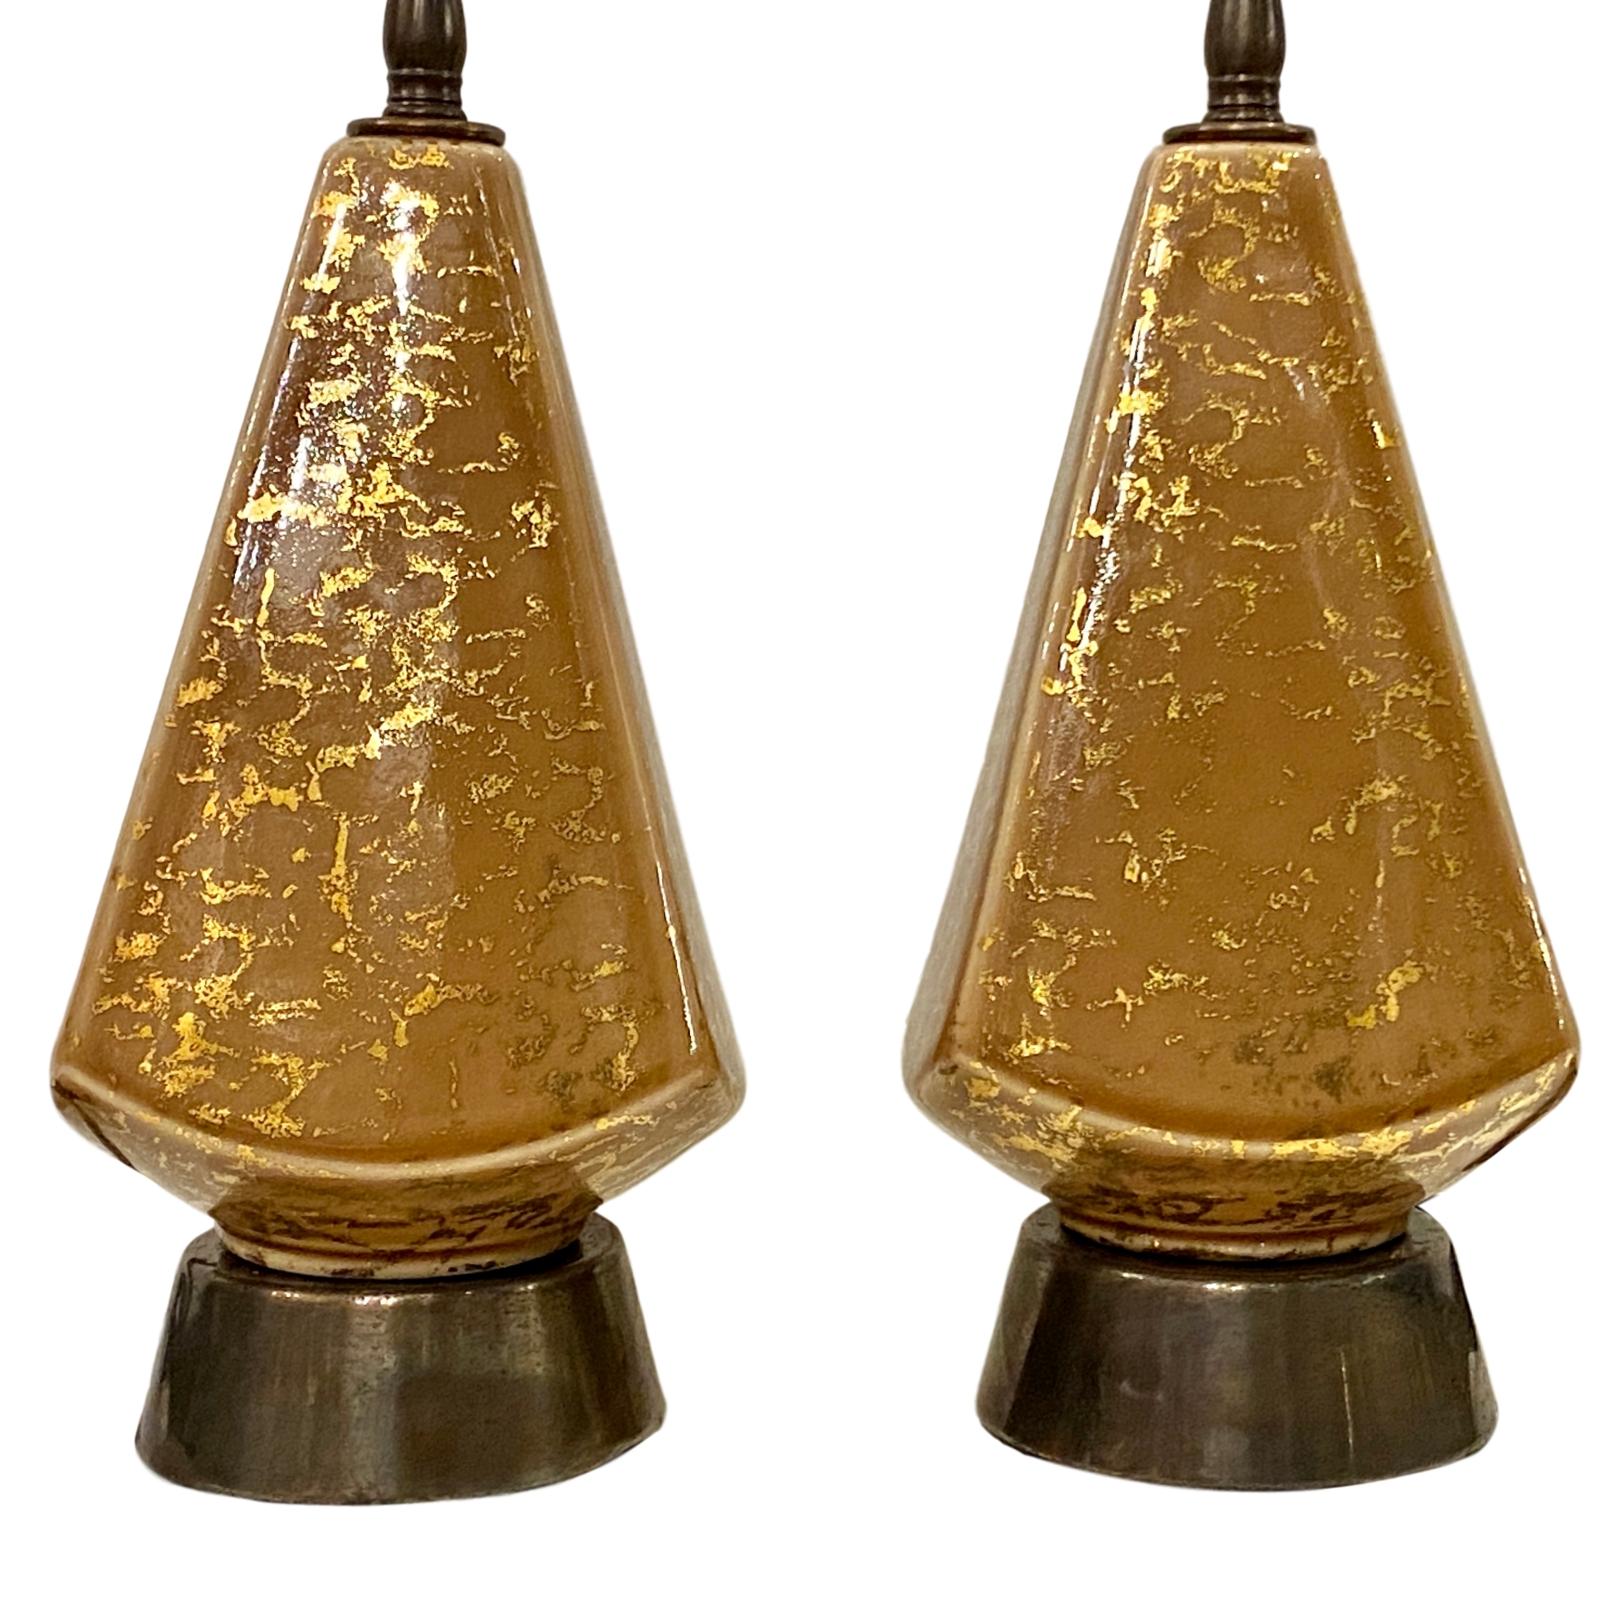 A pair of circa 1950's Italian porcelain table lamps.

Measurements:
Height of body: 10